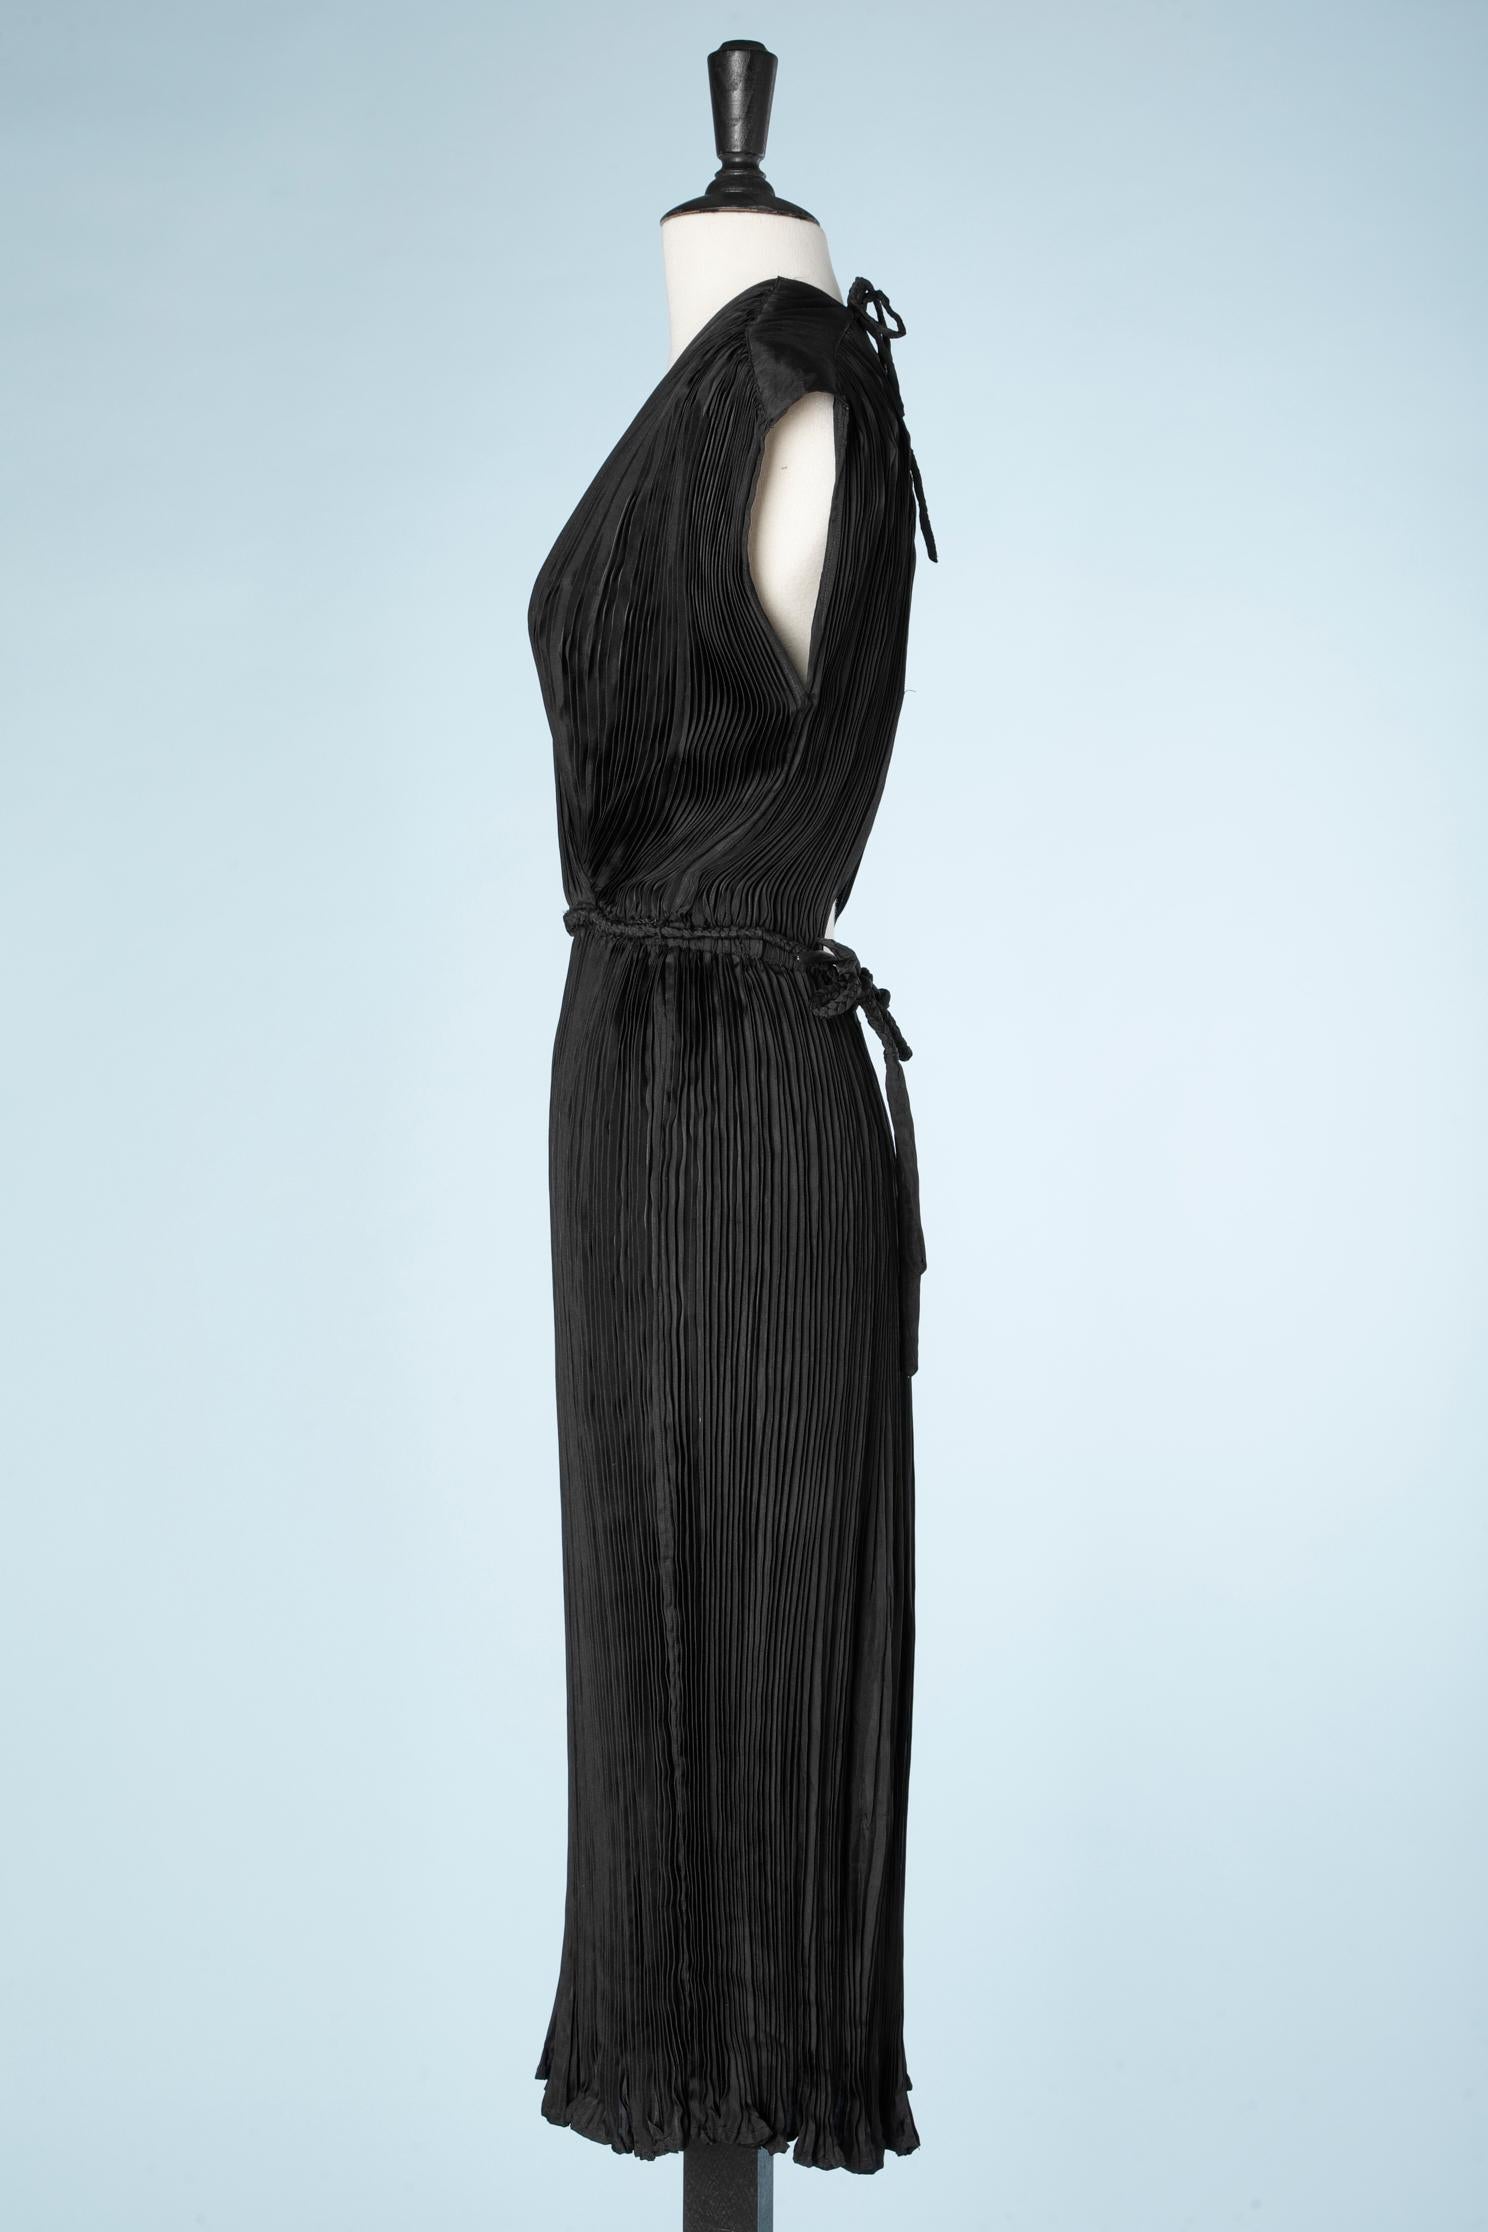 Black pleated backless dress with braided  belt  Fortuny's style  1